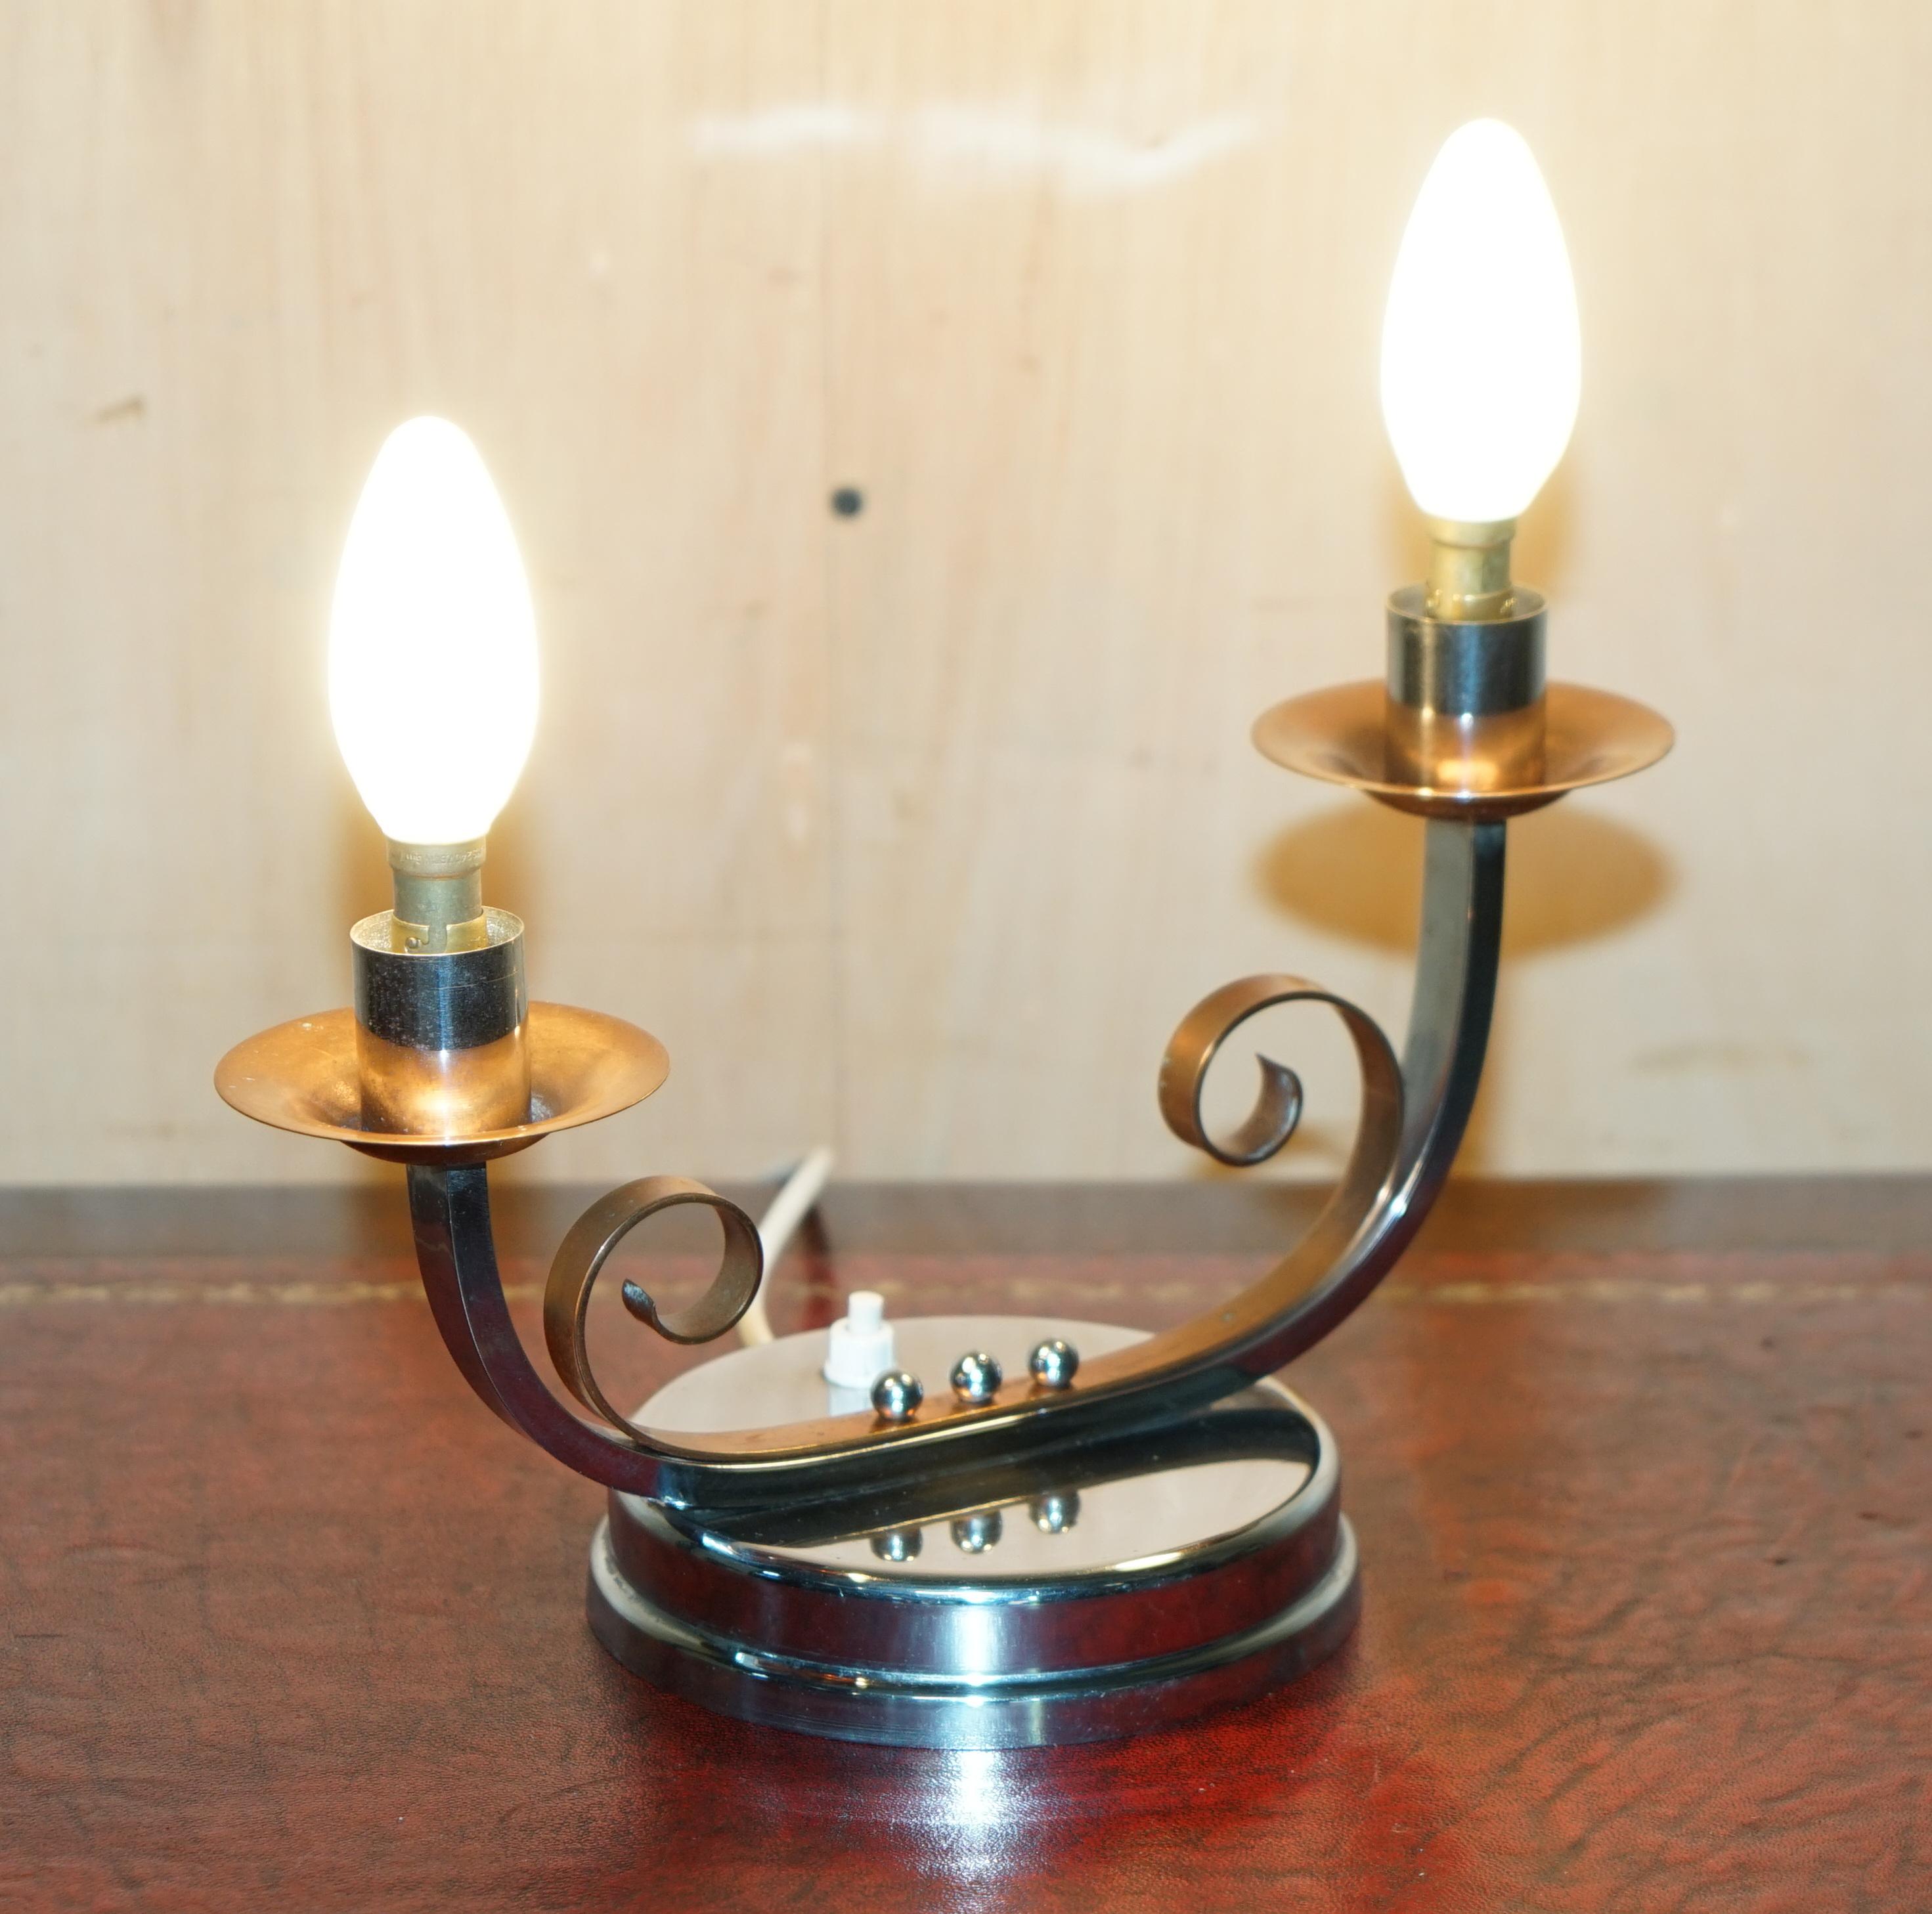 Royal House Antiques

Royal House Antiques is delighted to offer for sale this very good looking and well made pair of circa 1920's Art Deco Chrome and Copper table lamps with original depression switches 

Please note the delivery fee listed is